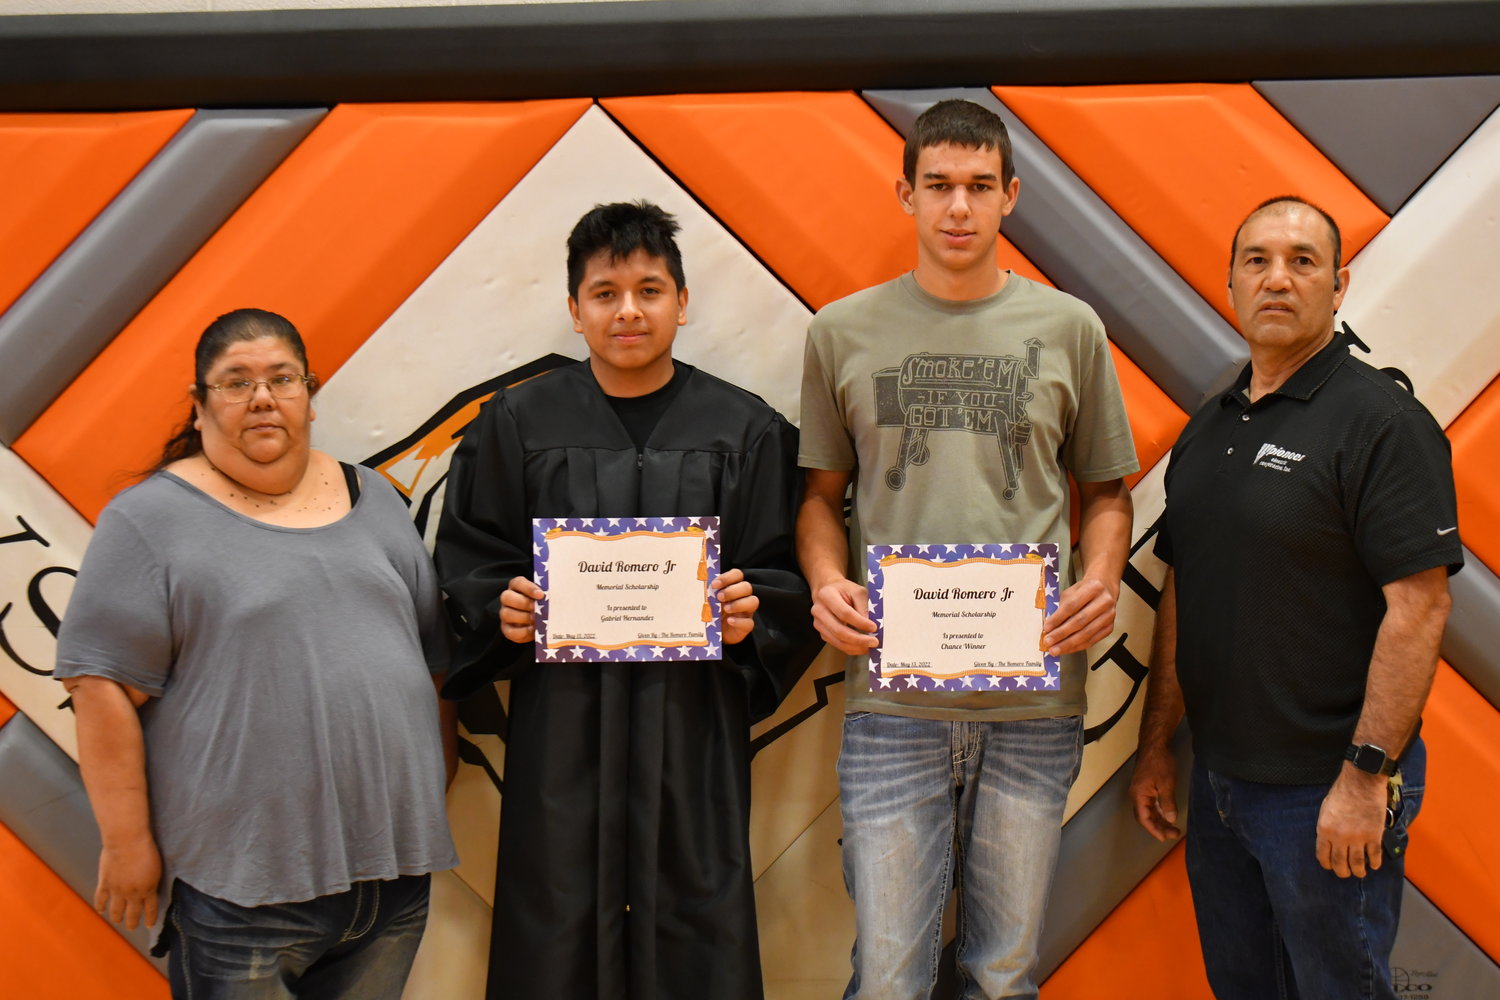 Senior Awards — Gabriel Hernandez and Chance Winner were given the David Romero Jr. Scholarship by Michelle and David Romero on Friday, May 13, 2022.